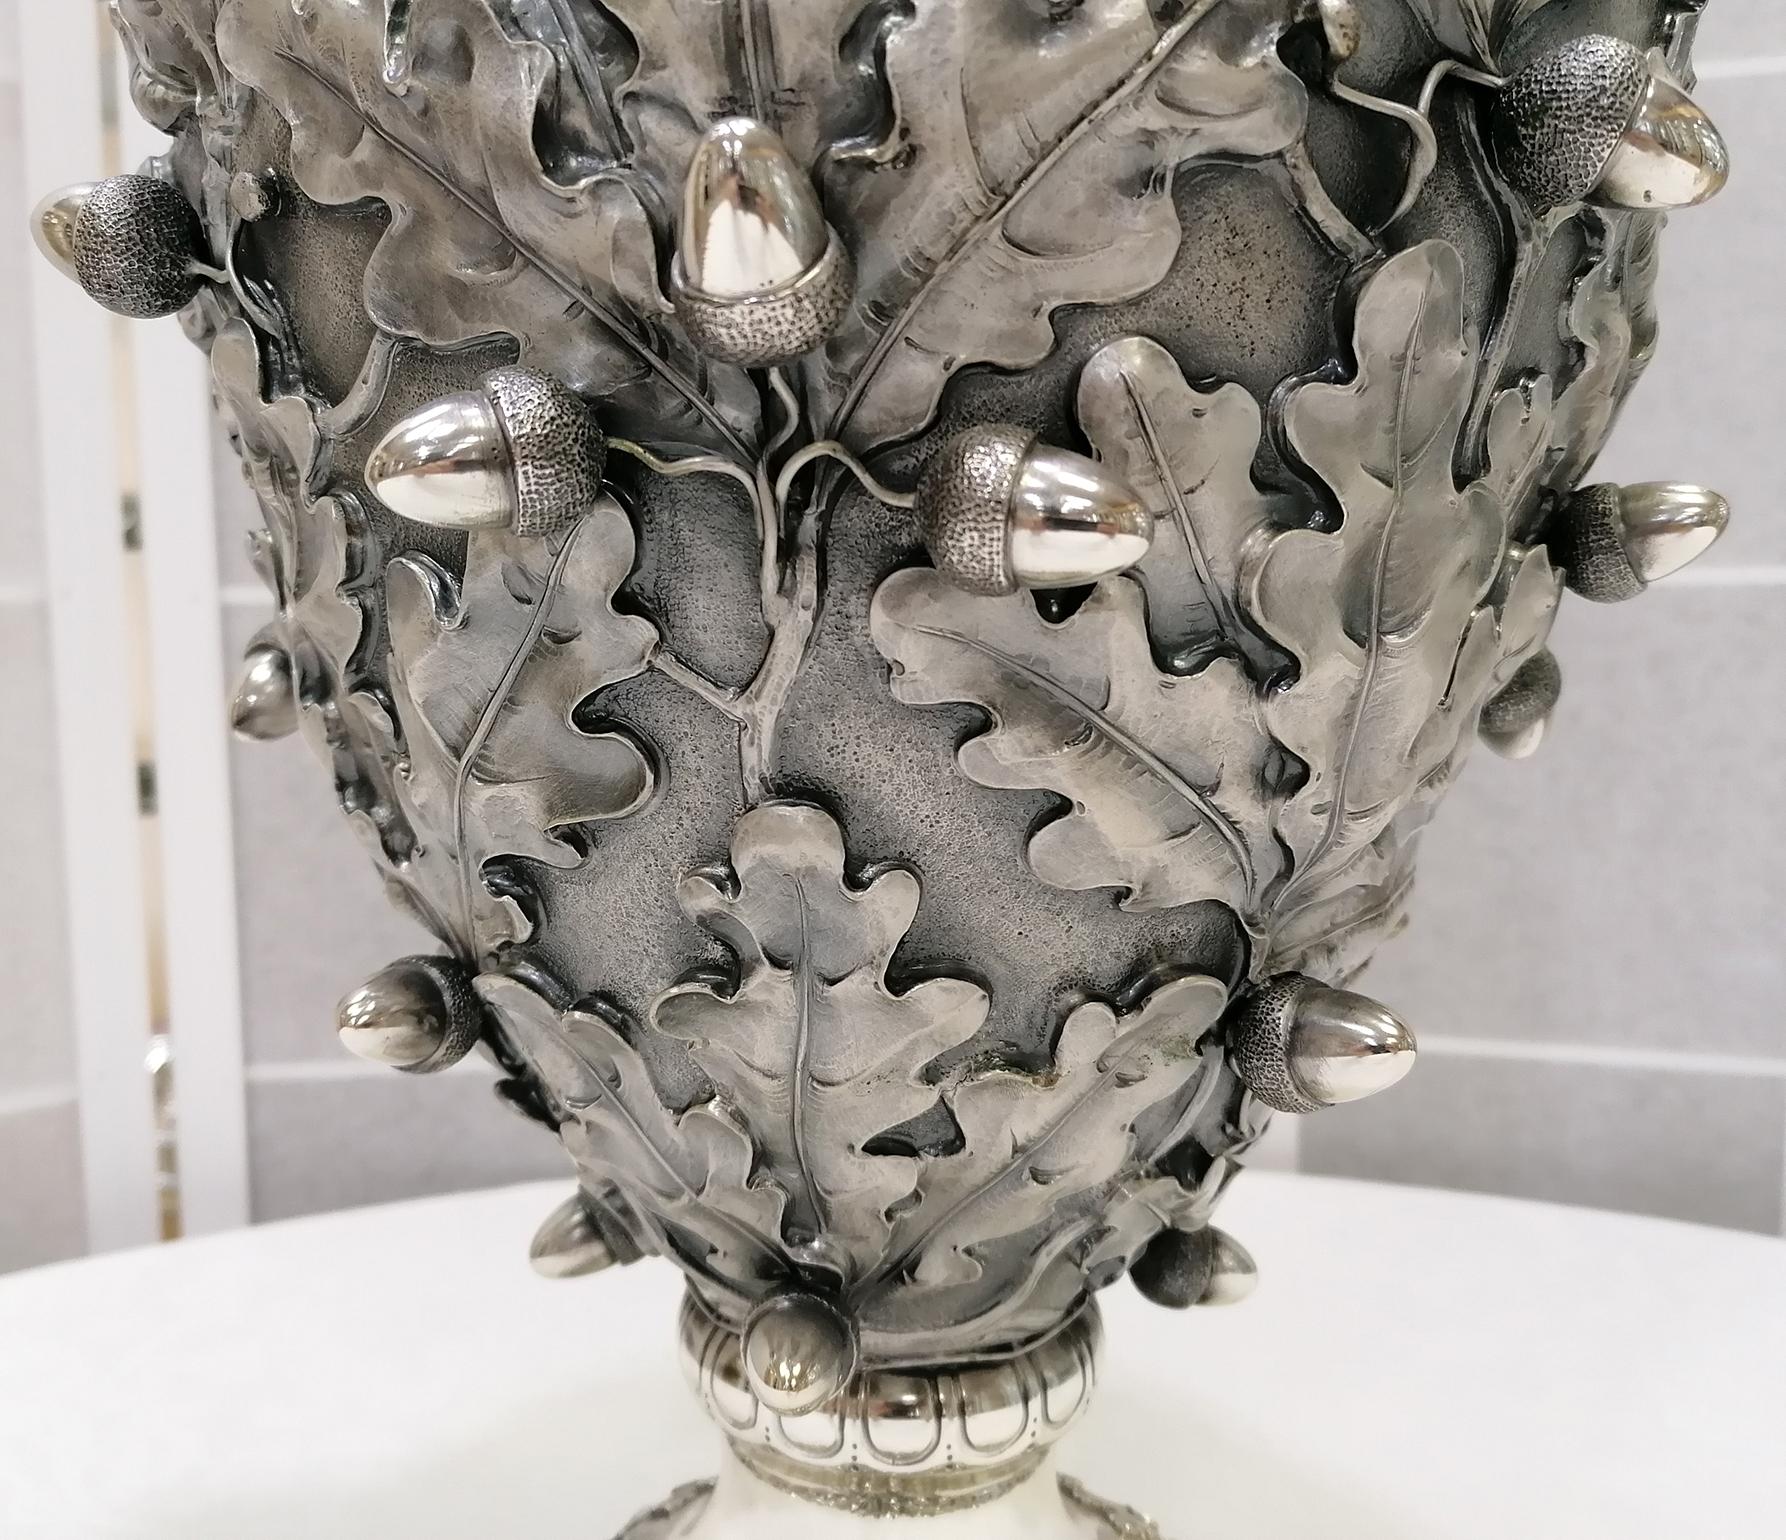 Burnished 20th Century Italian Silver Oak Leaves Vase. Chiselled, embossed and burnished For Sale